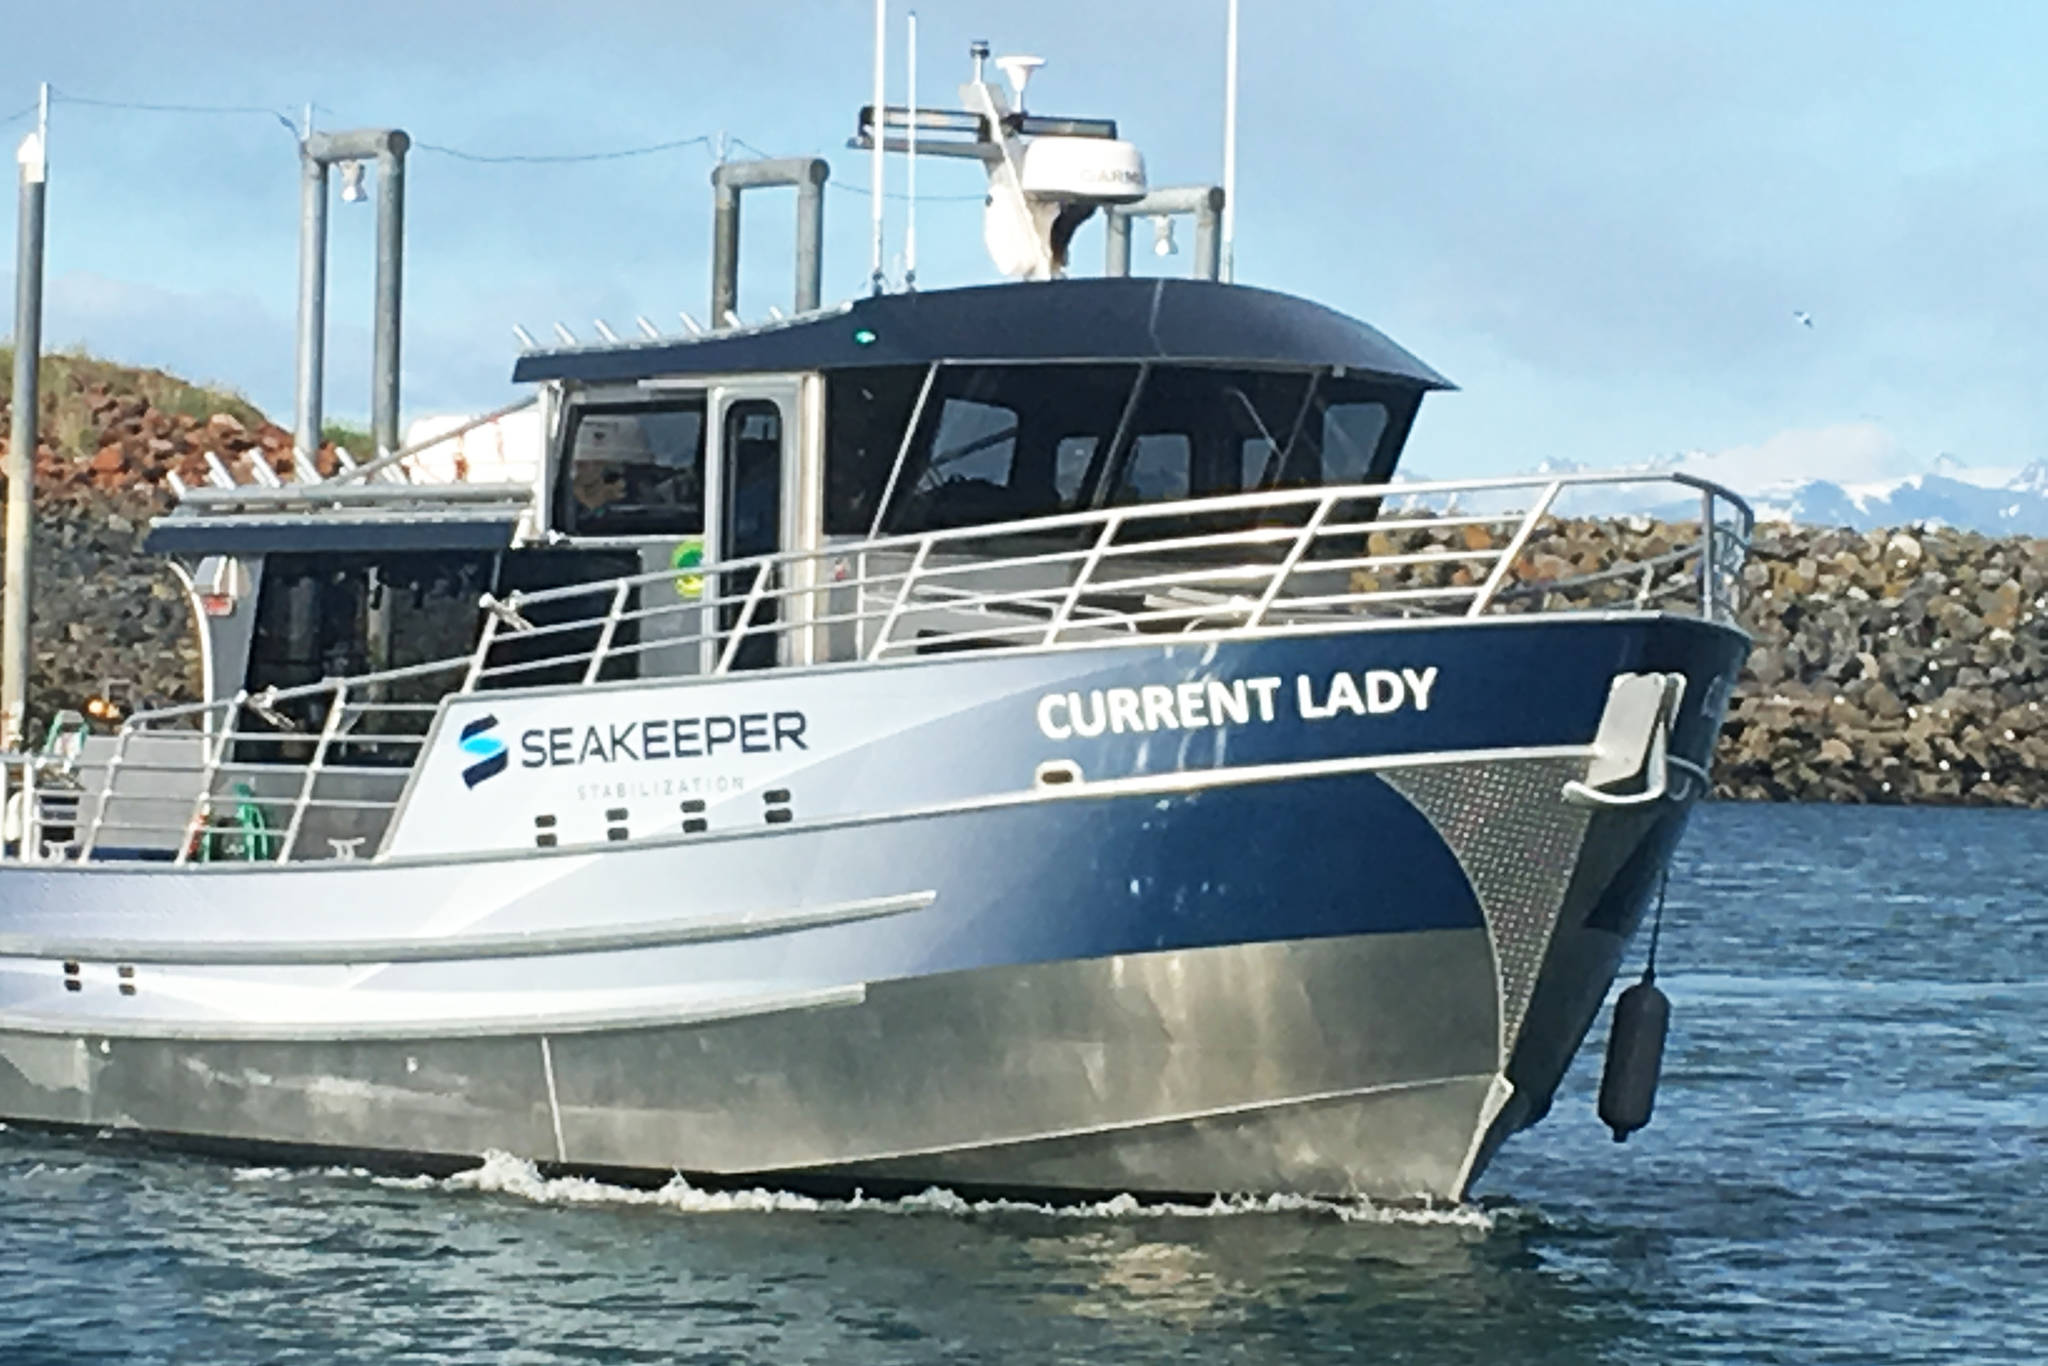 The Current Lady, shown here in this undated photo, is the new boat owned by Dakota Ocean Charters, a new charter business operating in Homer, Alaska. (Photo courtesy Shelly Loos)